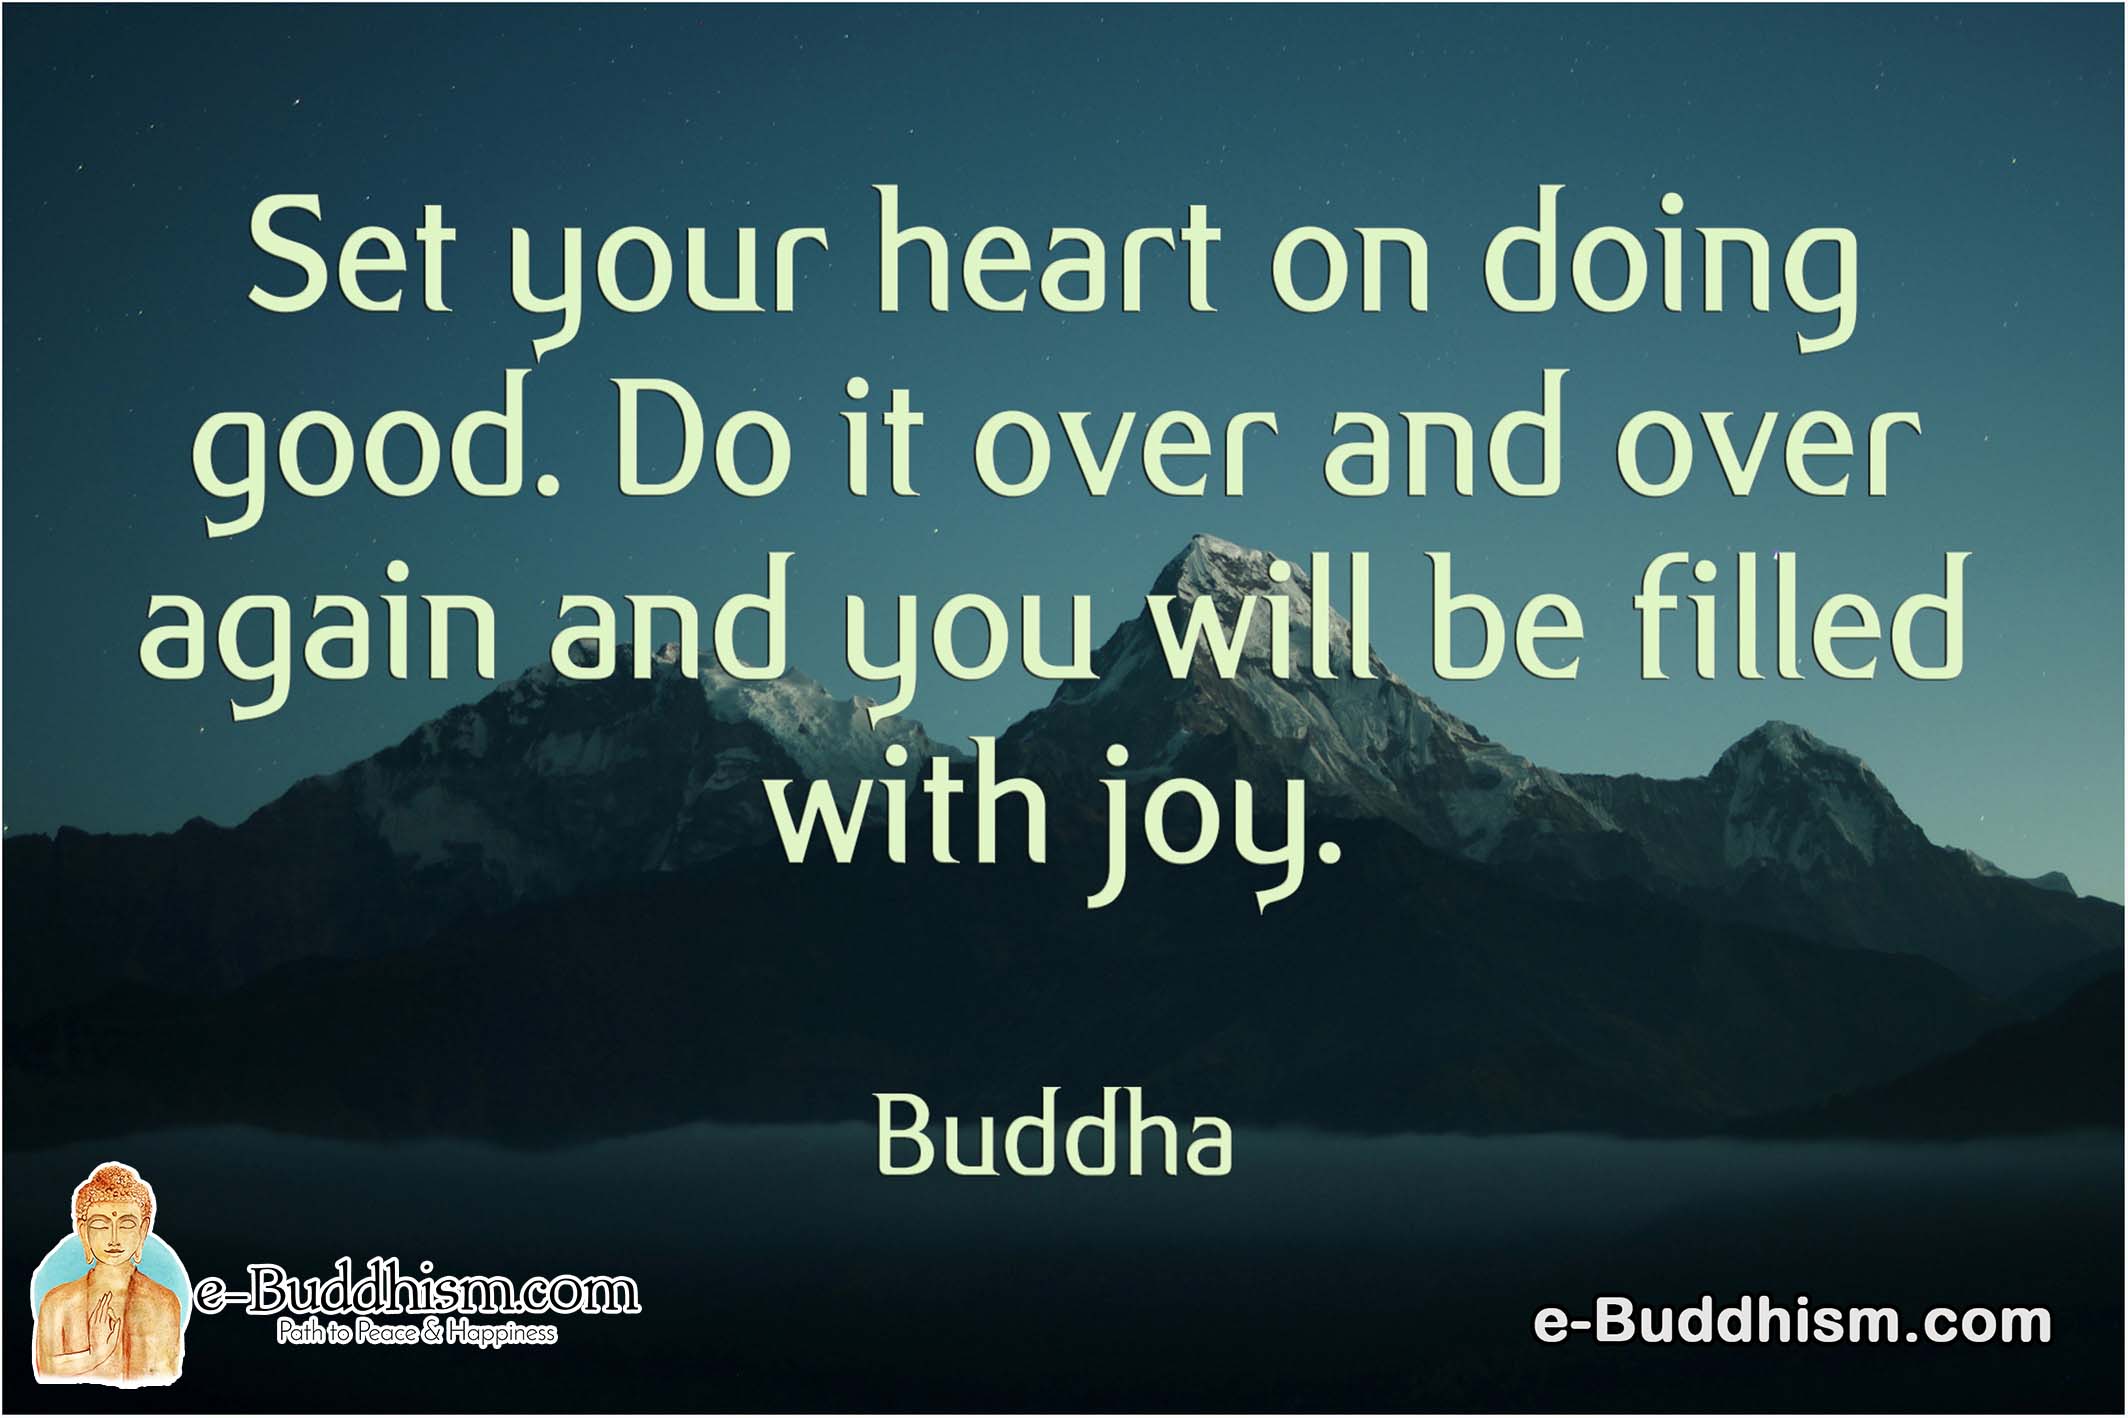 Set your heart on doing good. Do it over and over again and you will be filled with joy. -Buddha